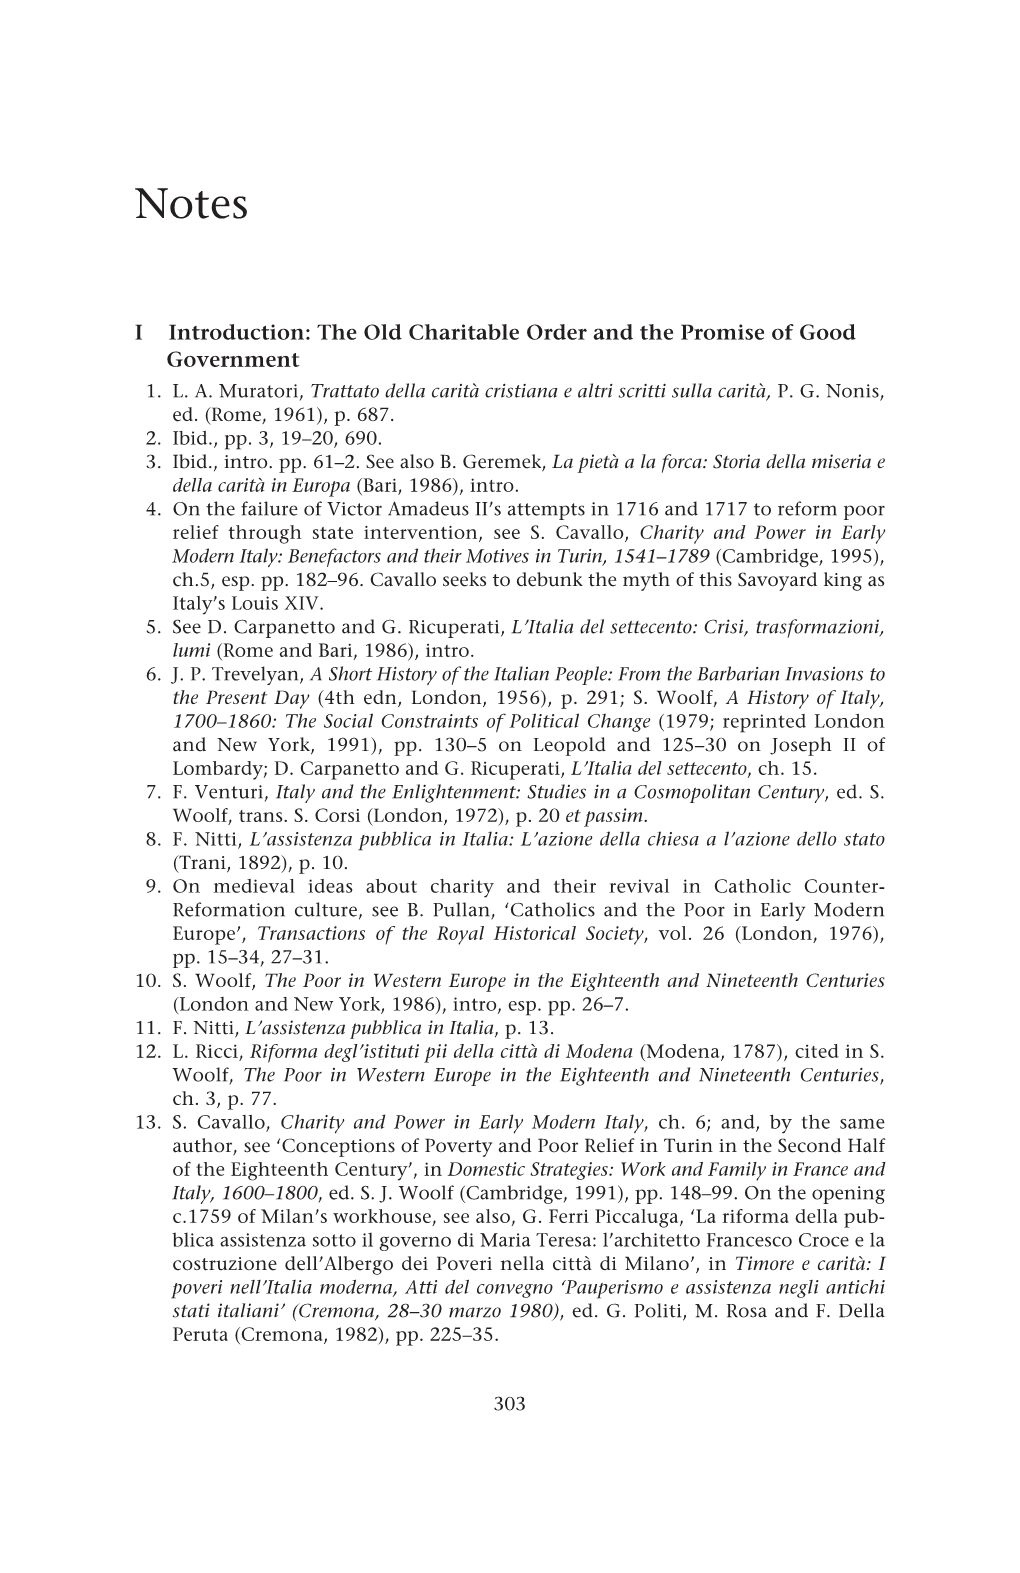 I Introduction: the Old Charitable Order and the Promise of Good Government 1